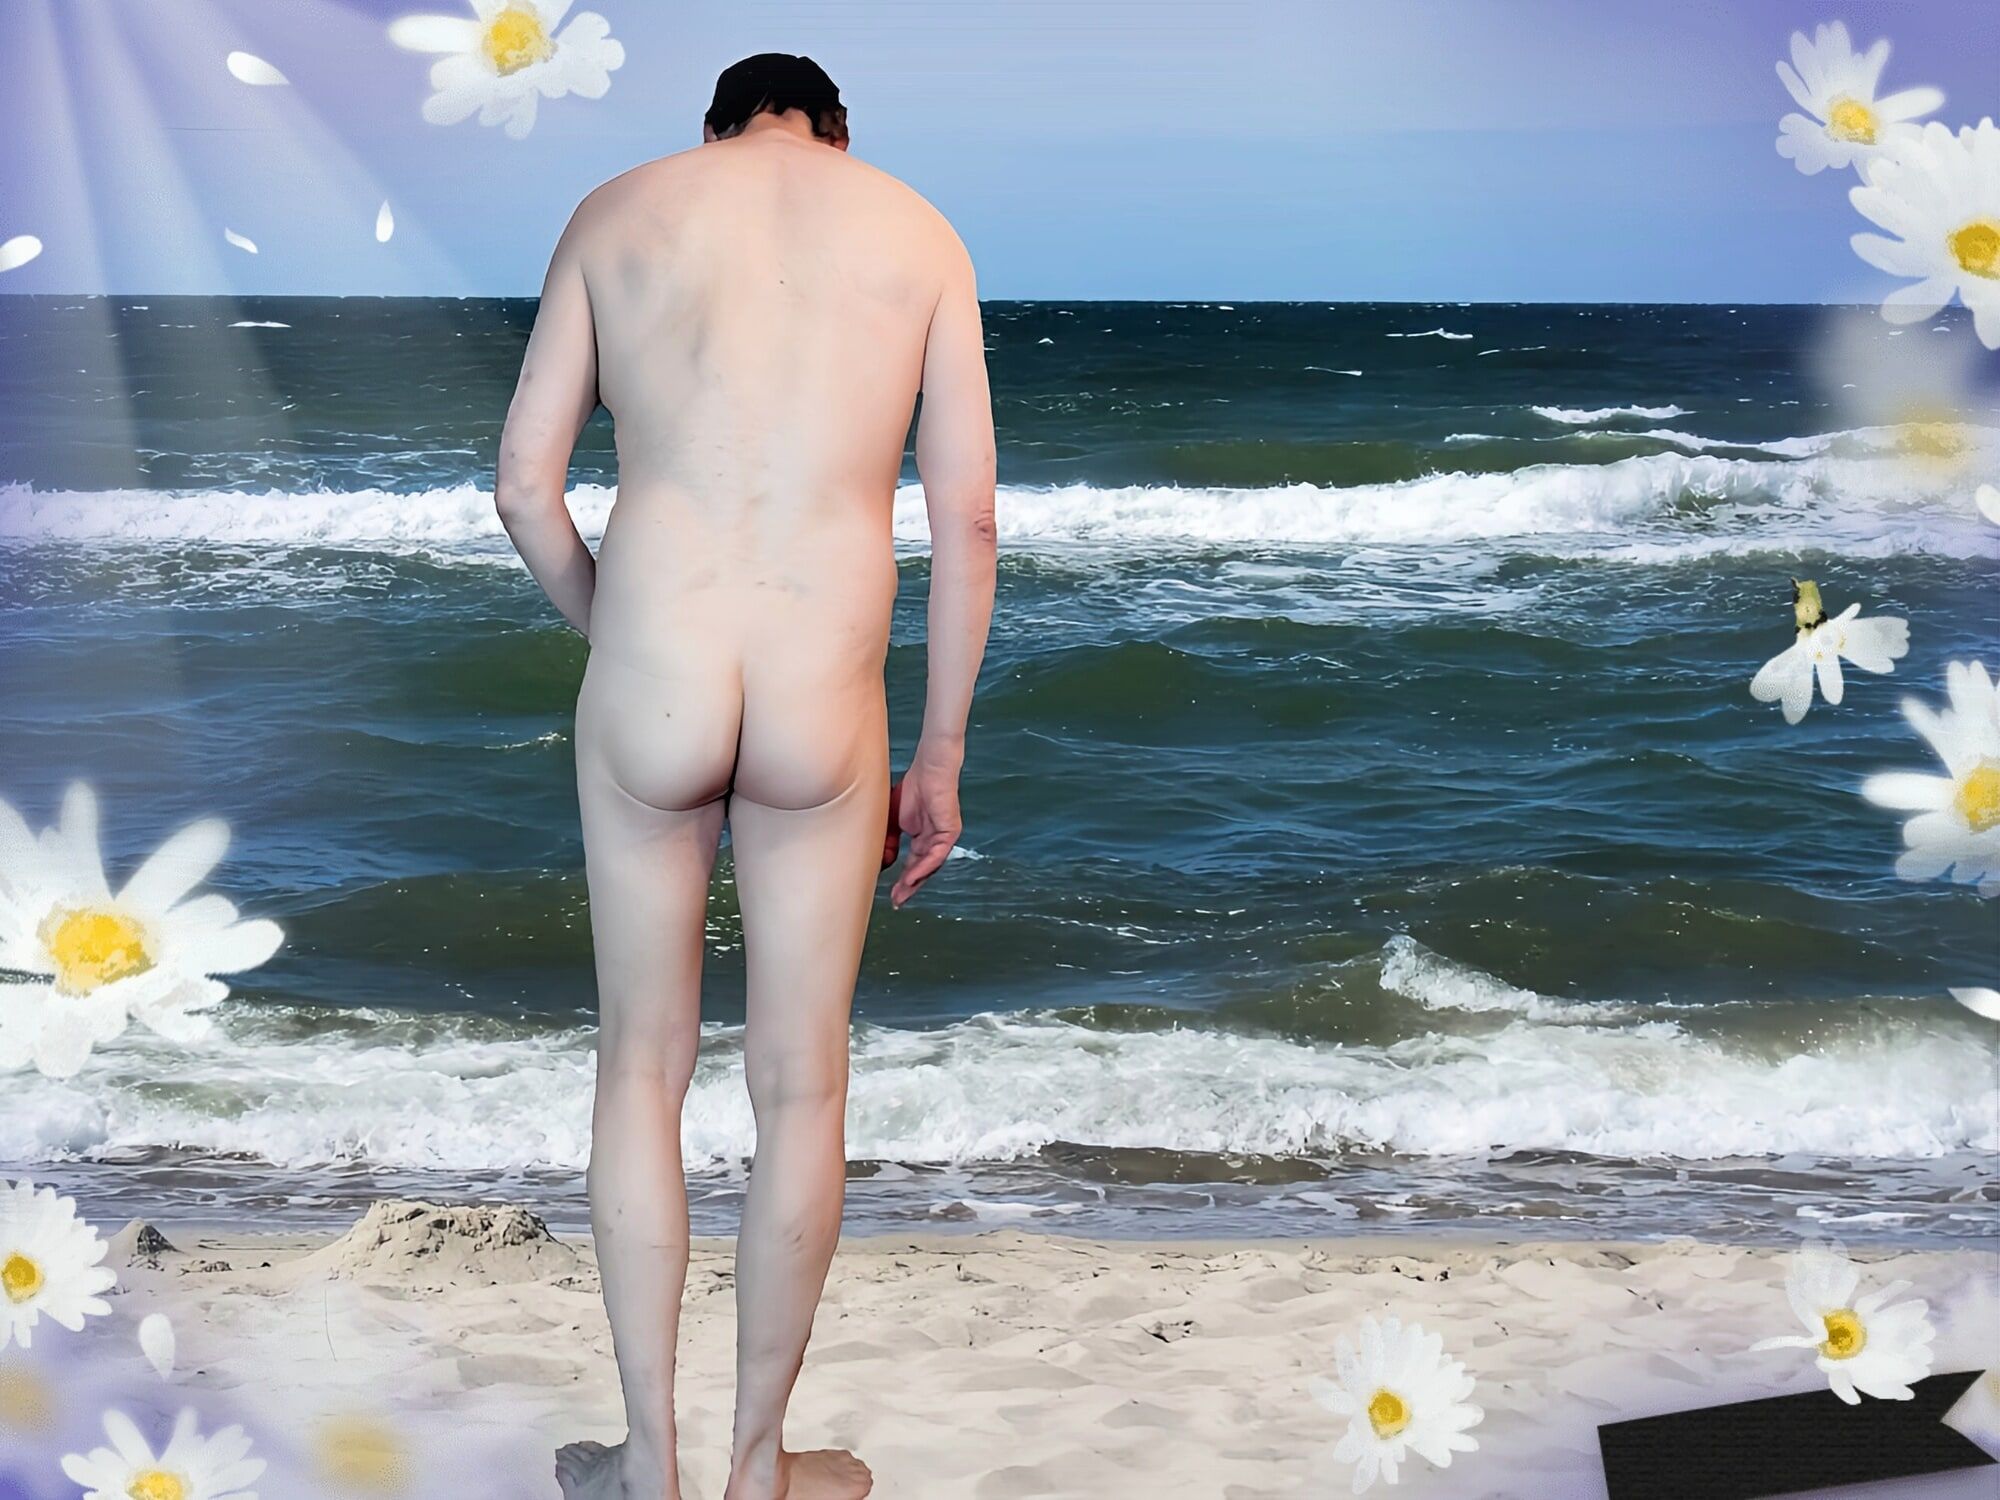 porcinus on vacation by the sea naturist beaches #3